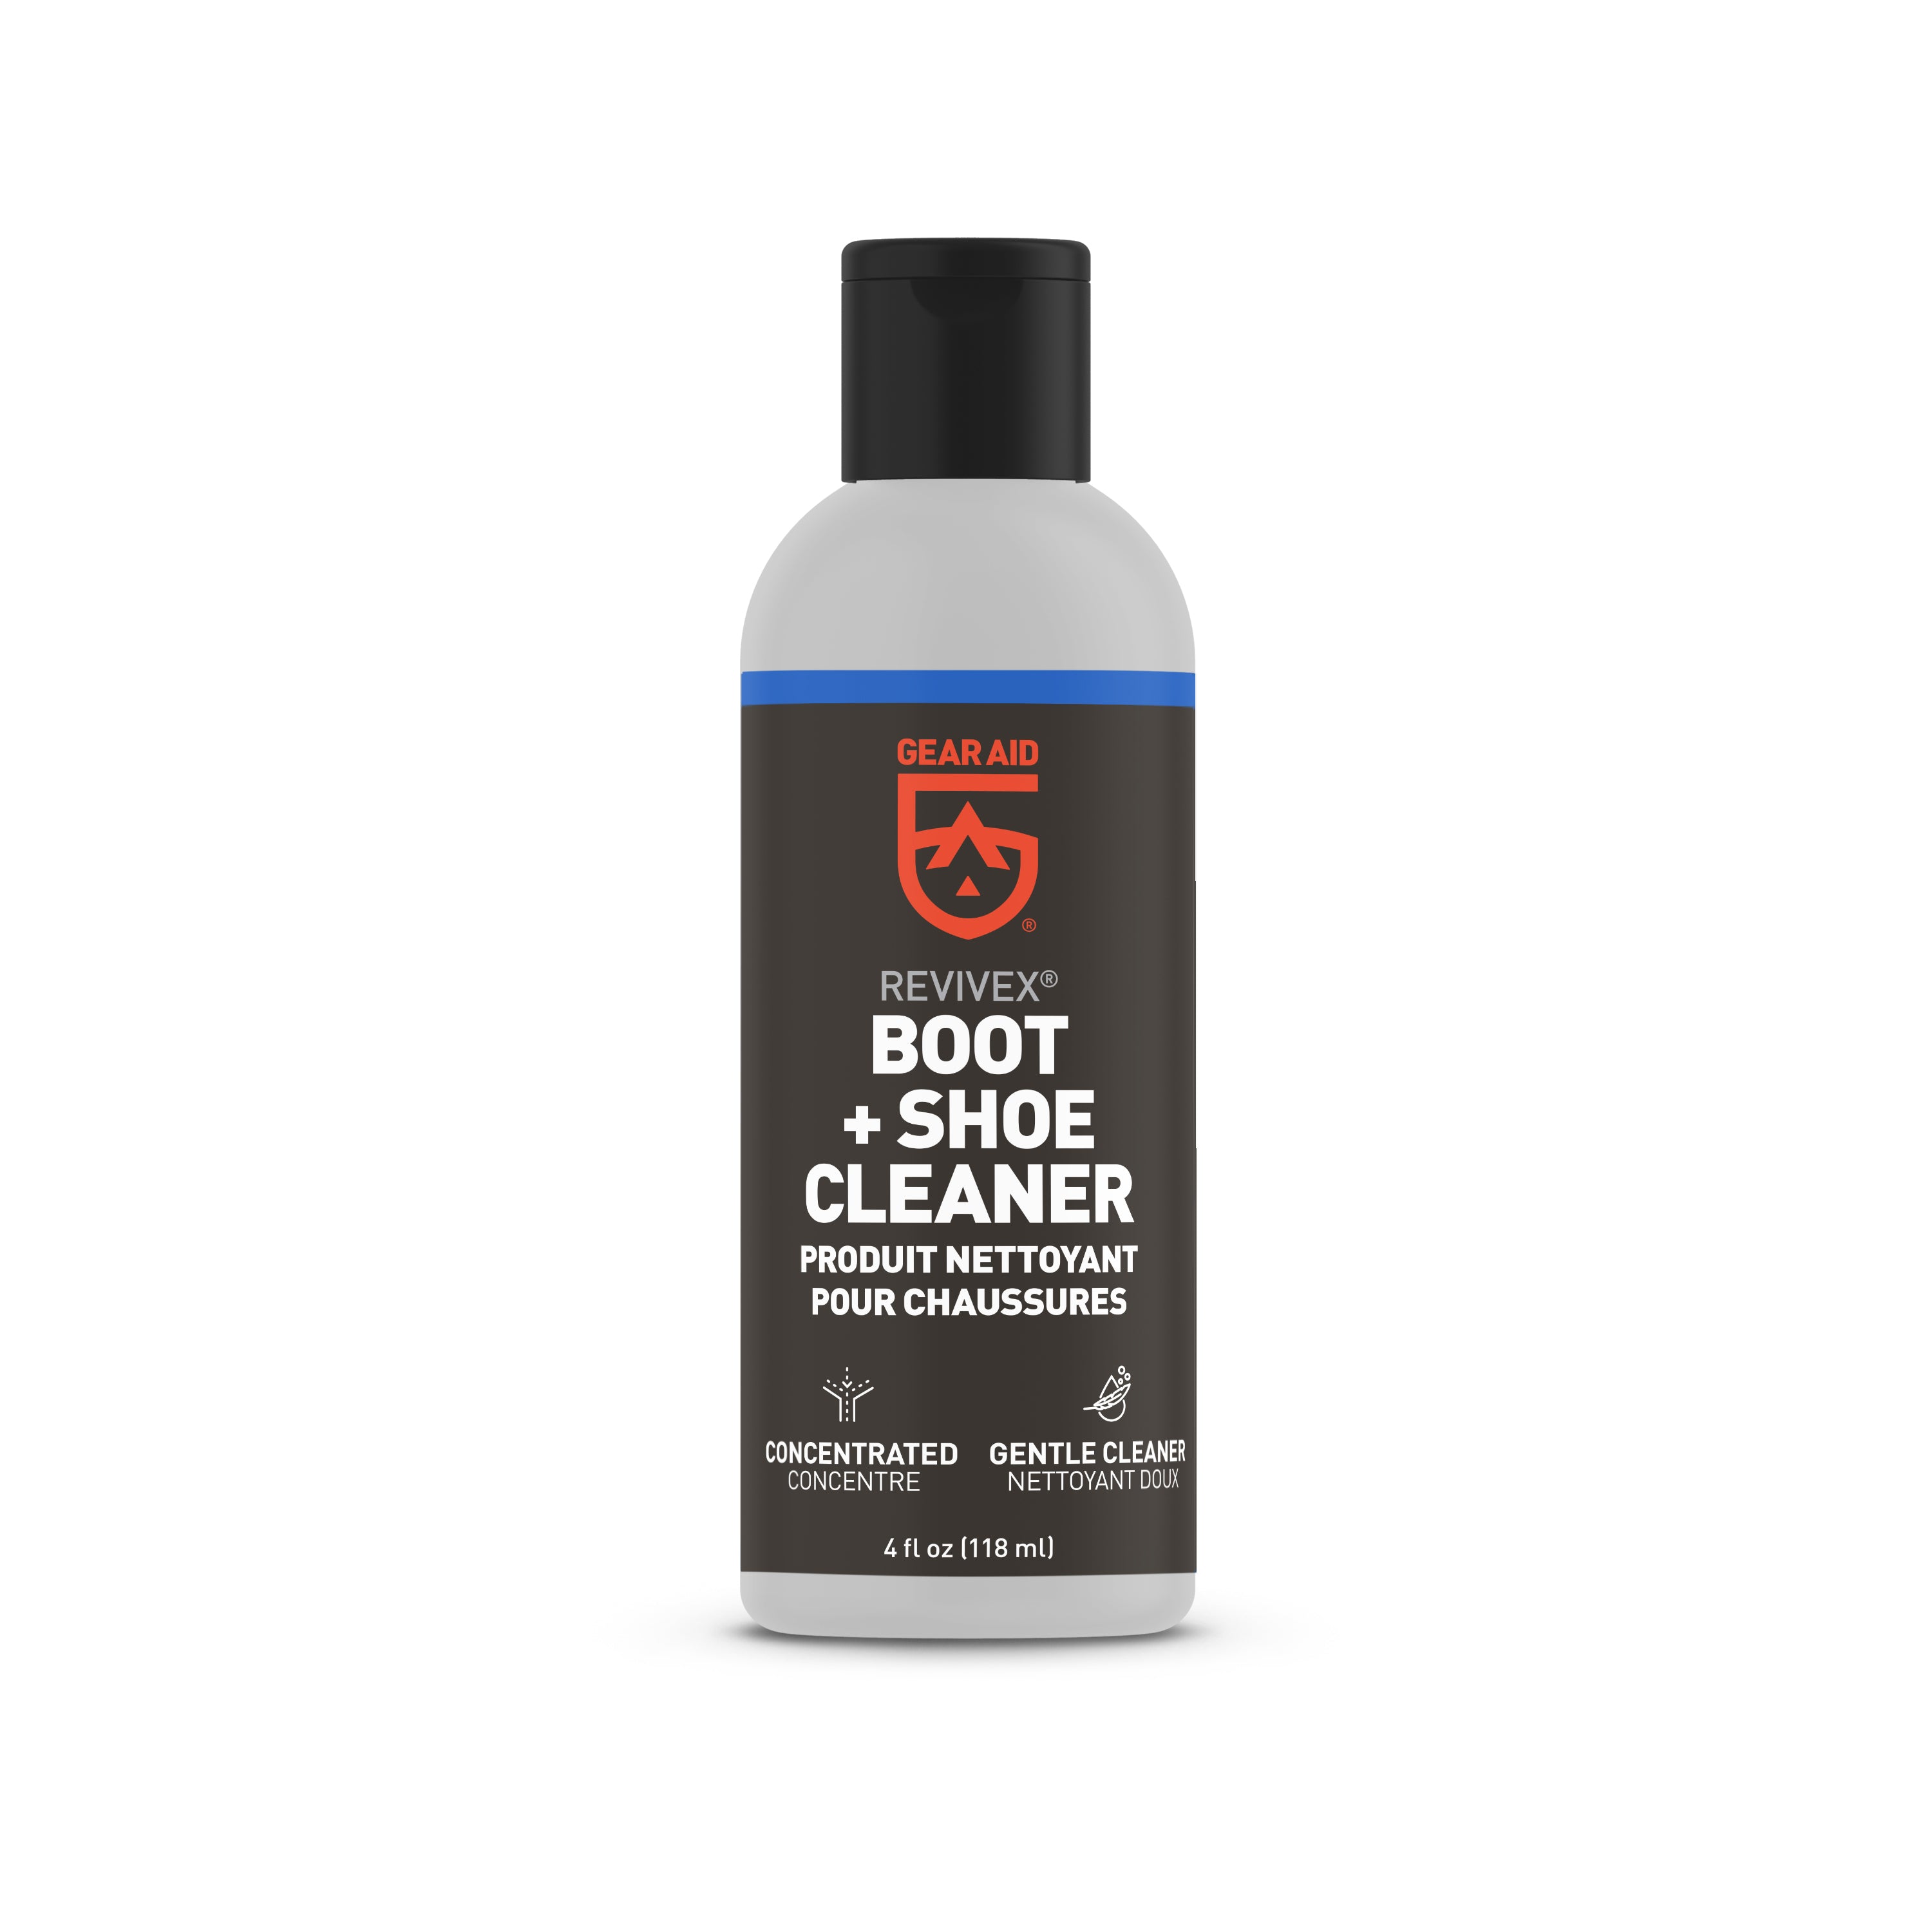 Revivex Boot and Shoe Cleaner | GEAR AID